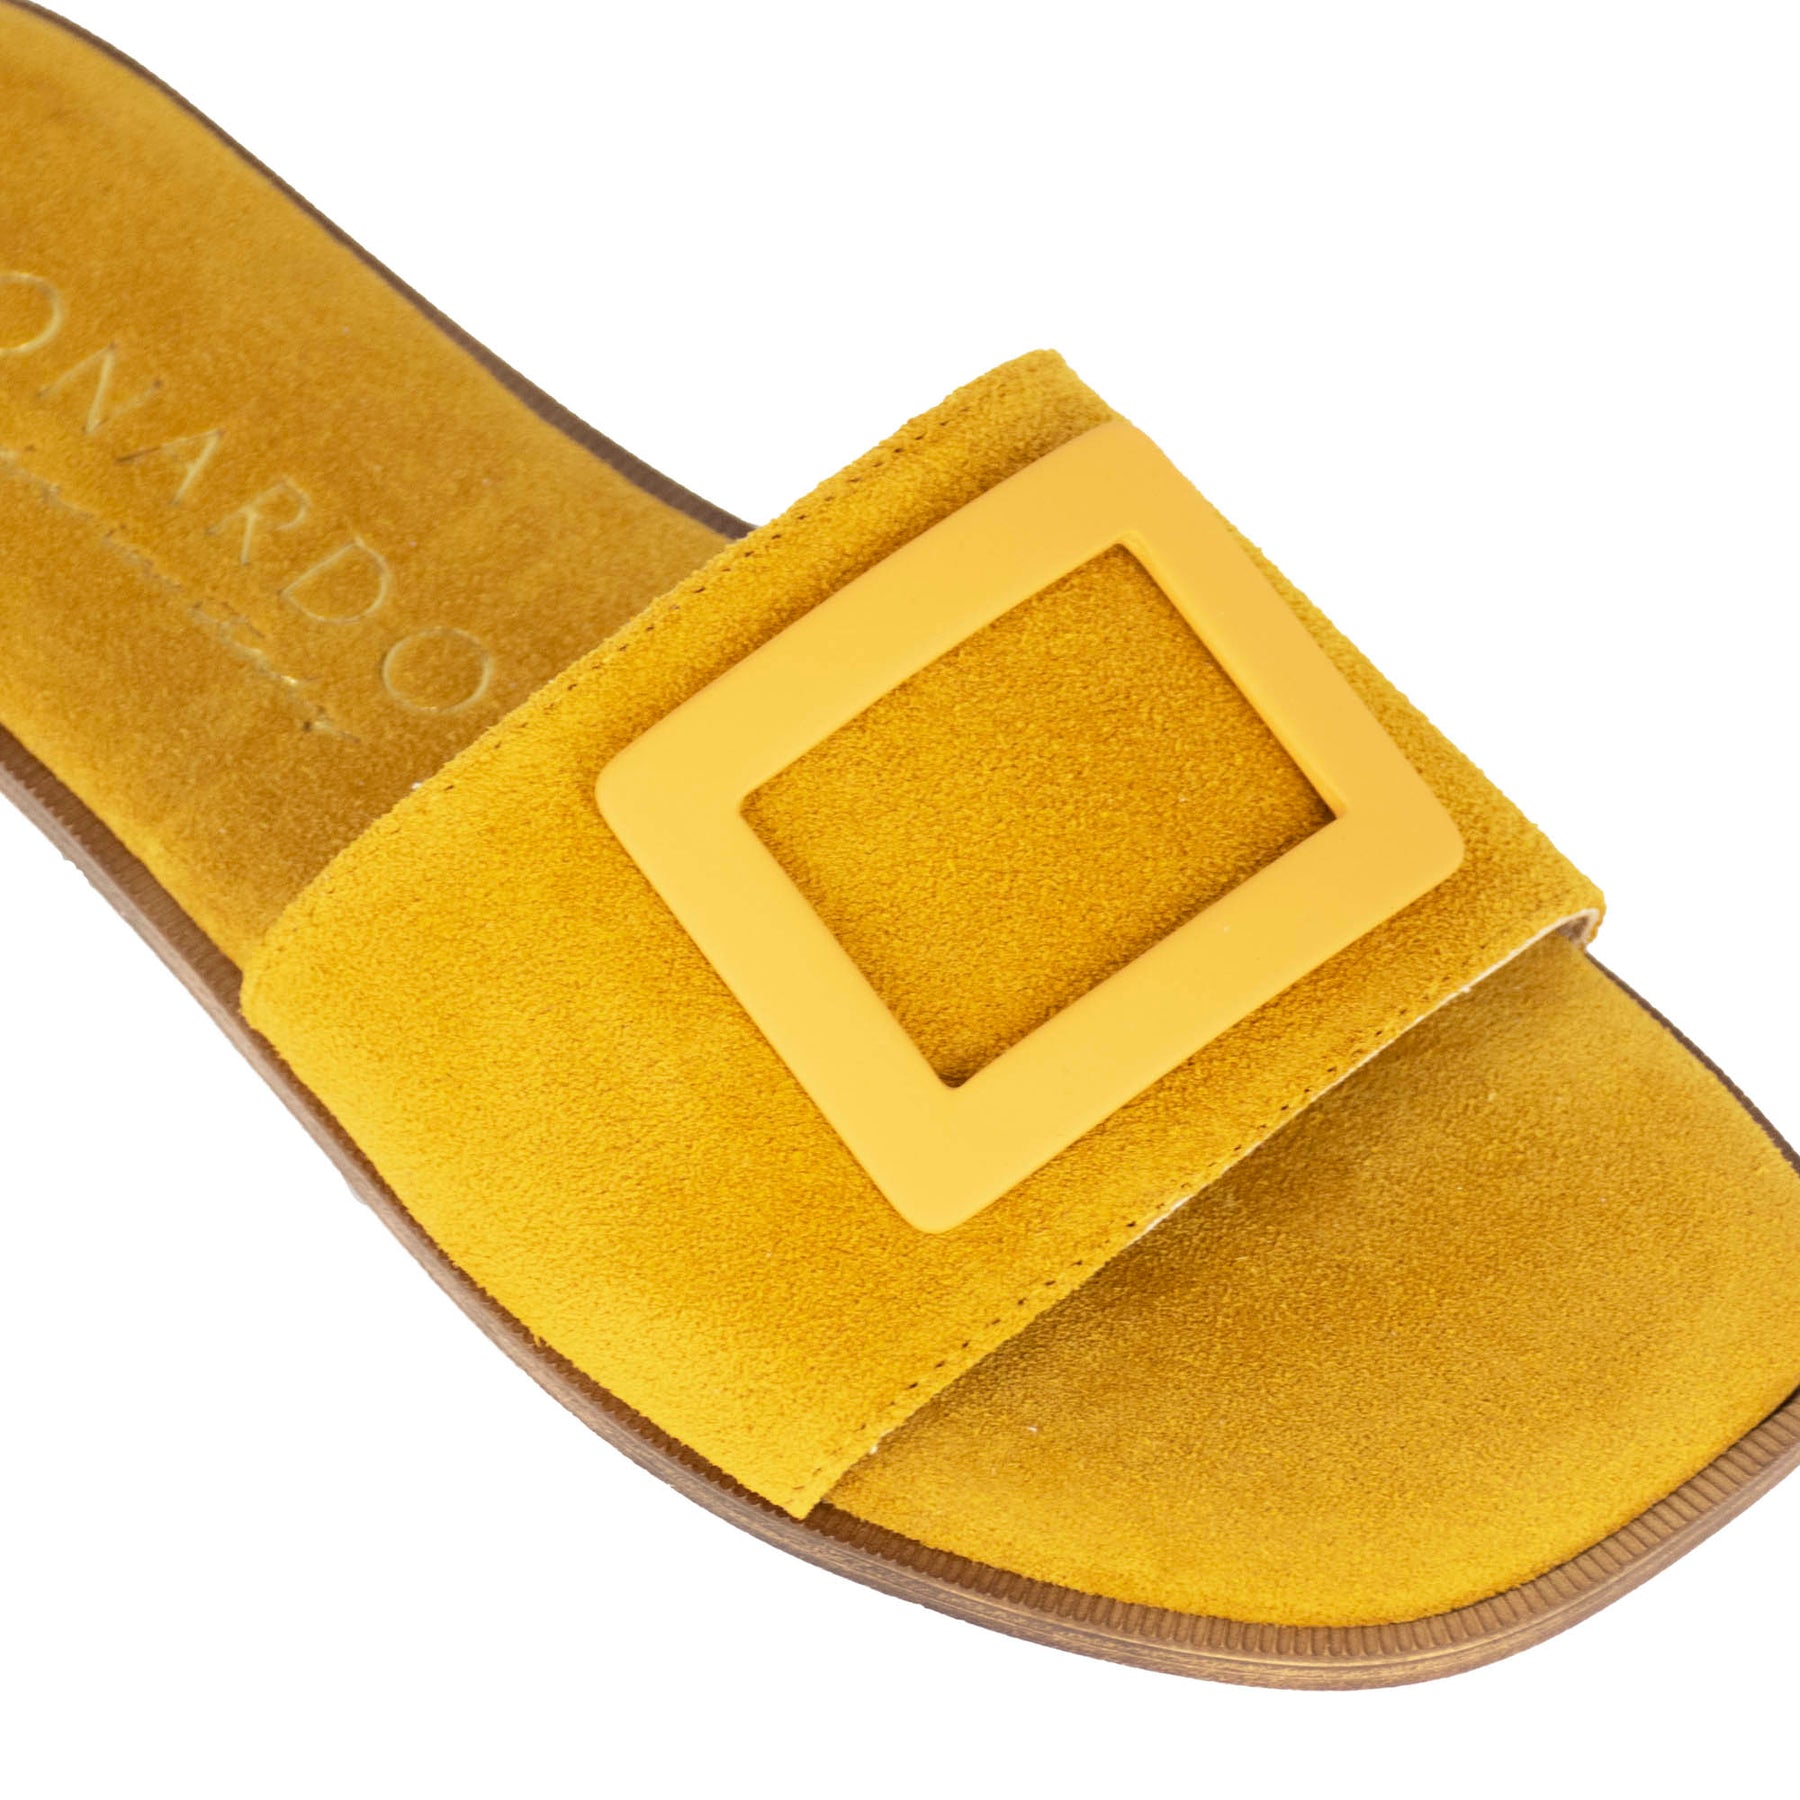 Women's suede slippers with yellow band